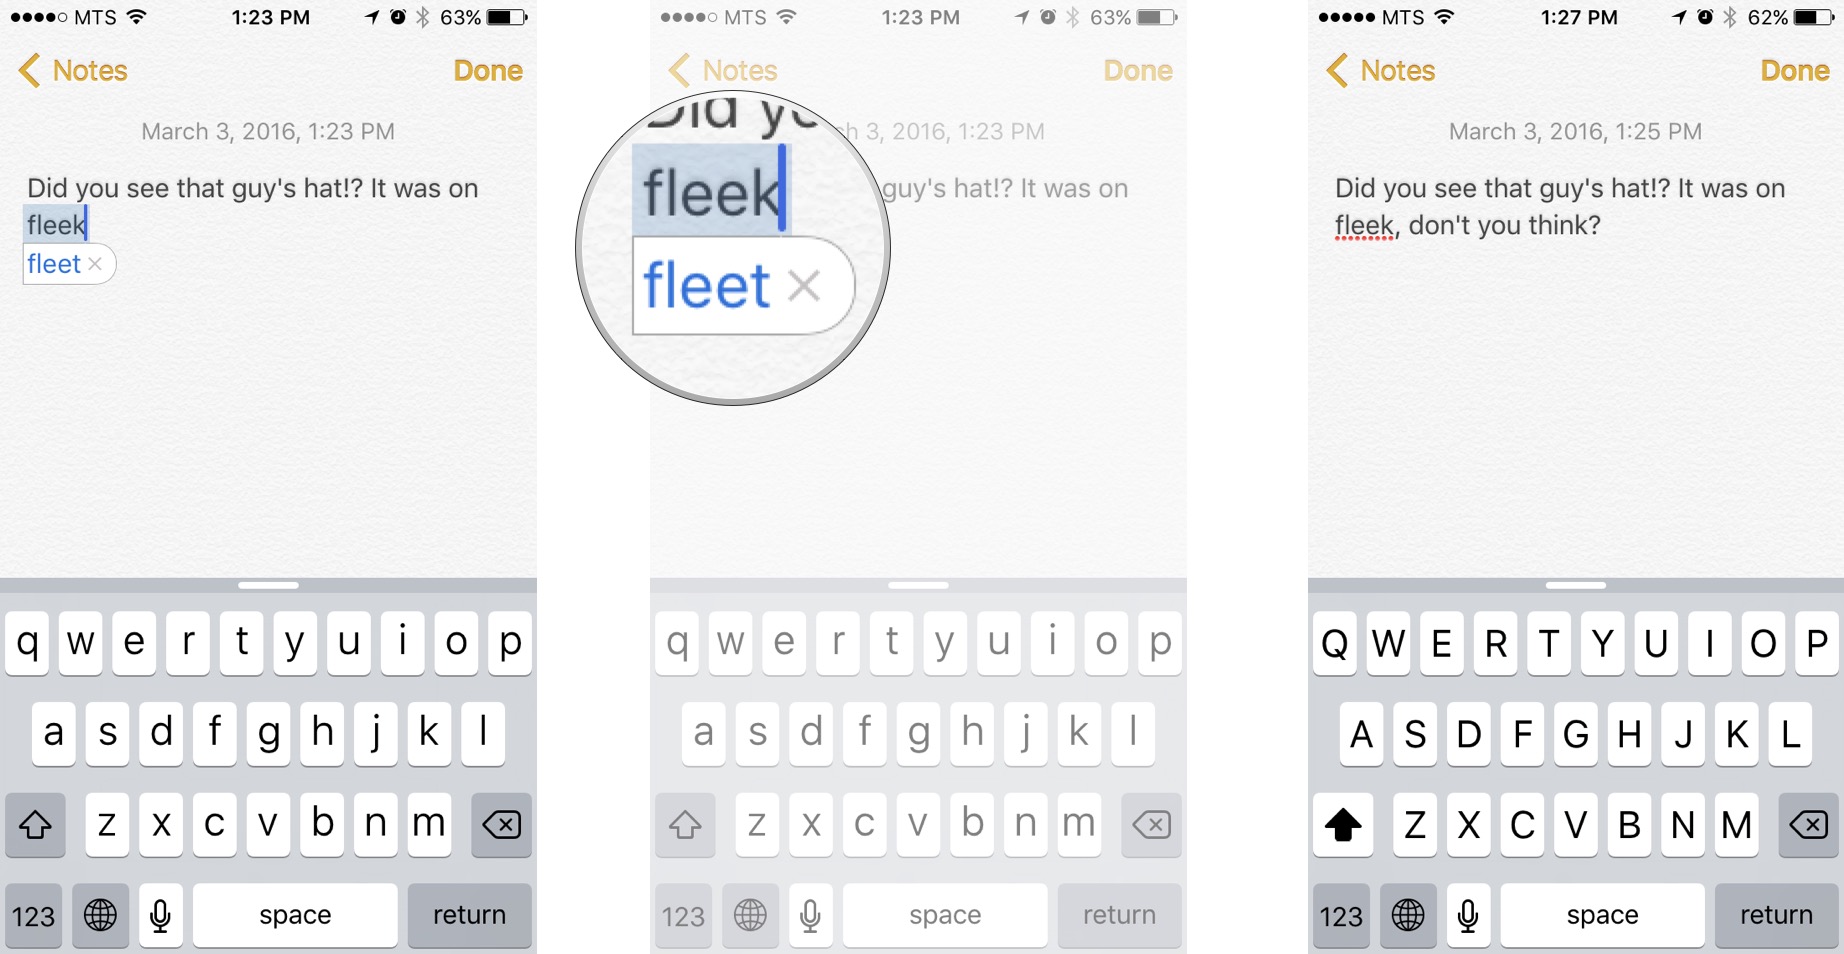 As you type a misspelled word the auto-correction feature will kick in and show you the word it will replace the misspelled word with. Just tap on the auto-corrected word to dismiss the feature.